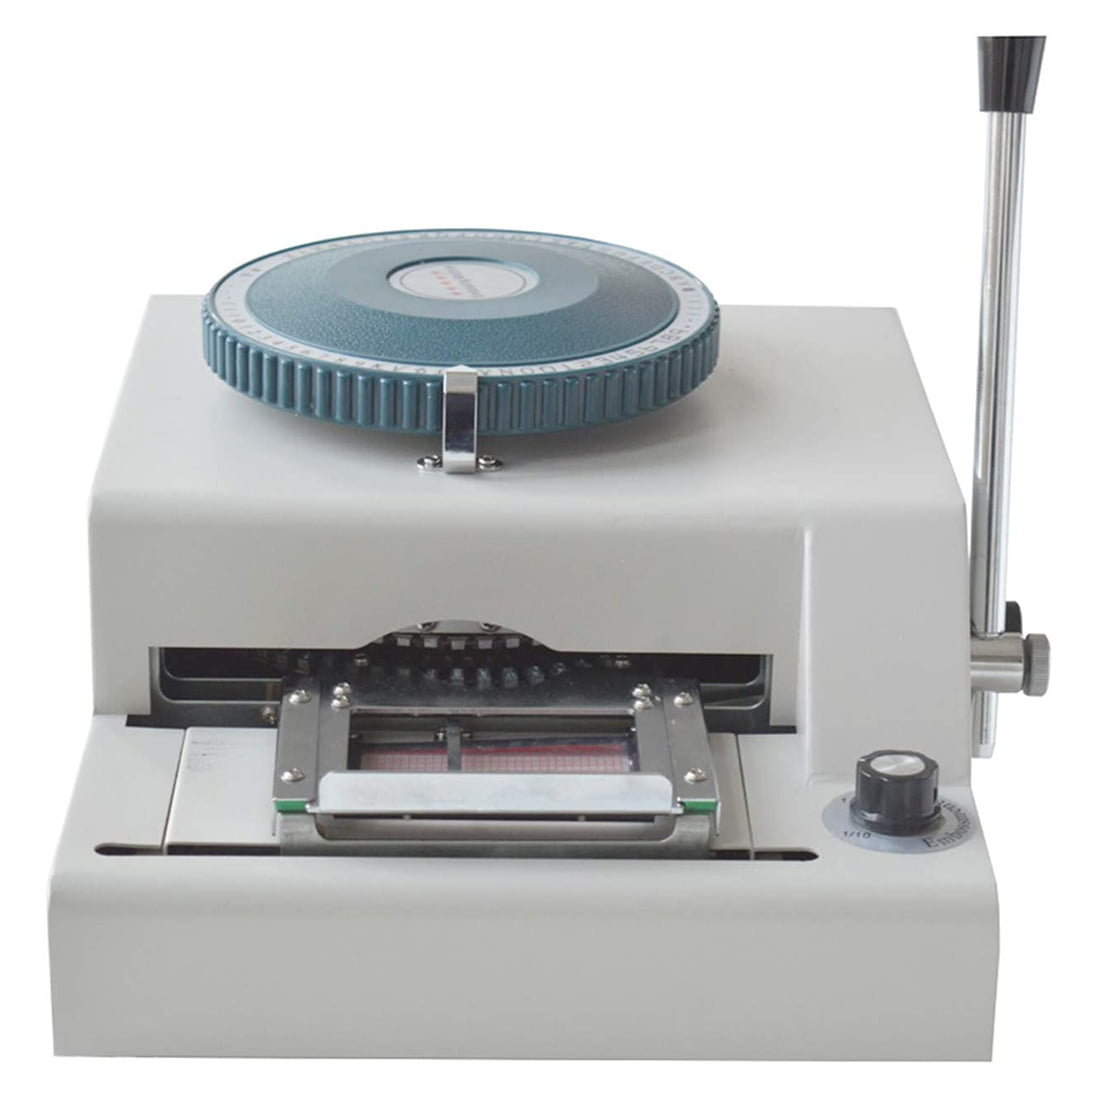 INTBUYING 71 Characters Convex Manual PVC/VIP ID Credit Card Embosser  Stamping Machine